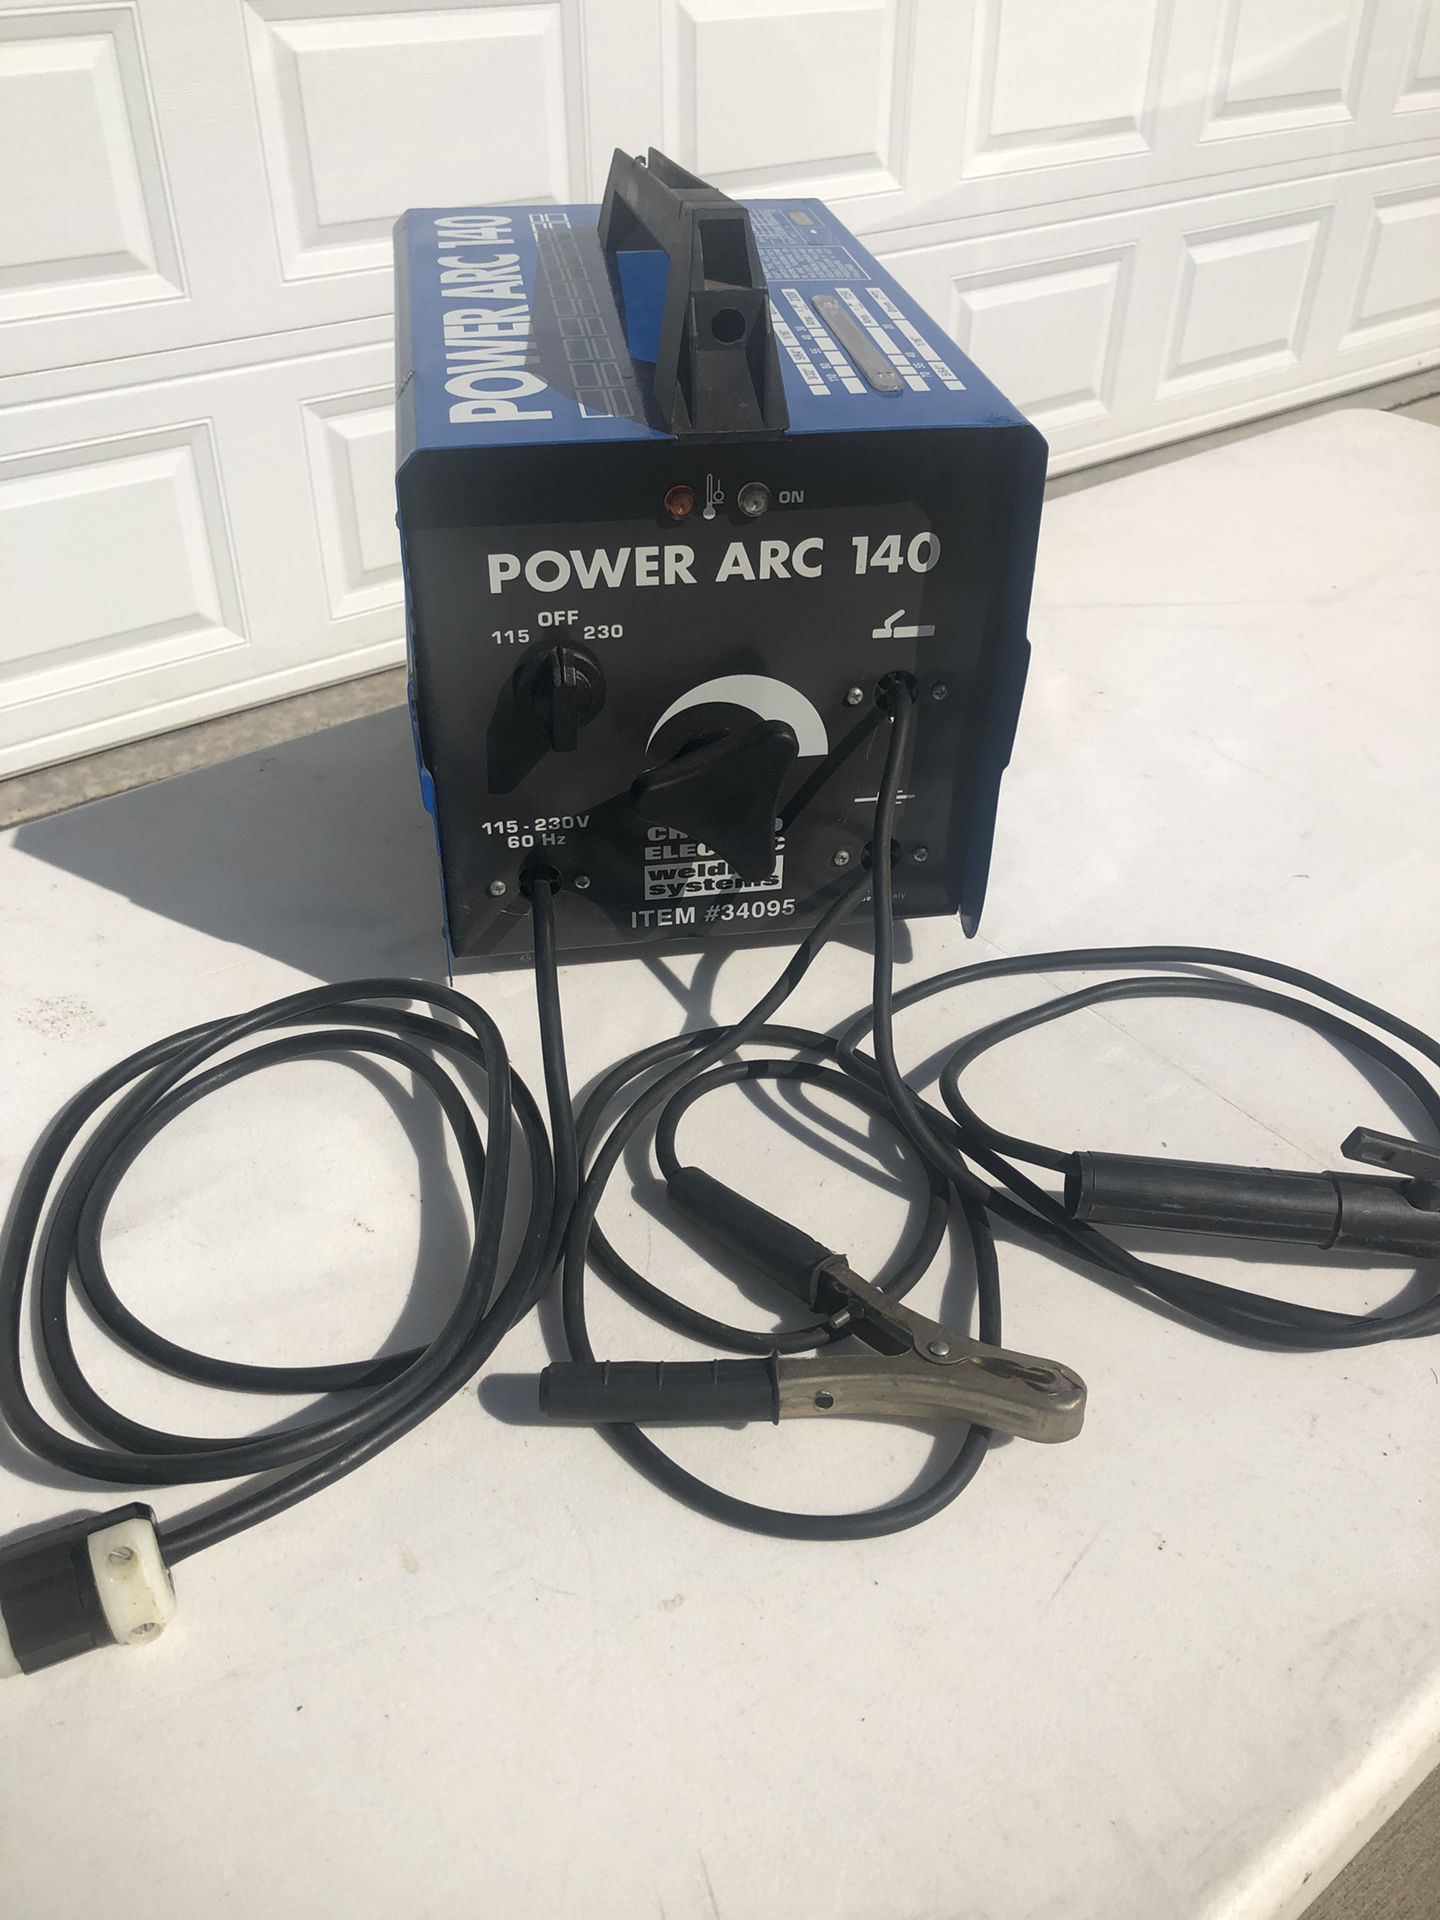 Chicago Electric Power Arc 140 Stick Welder 115-230 Volt. Used only a couple of times. $150